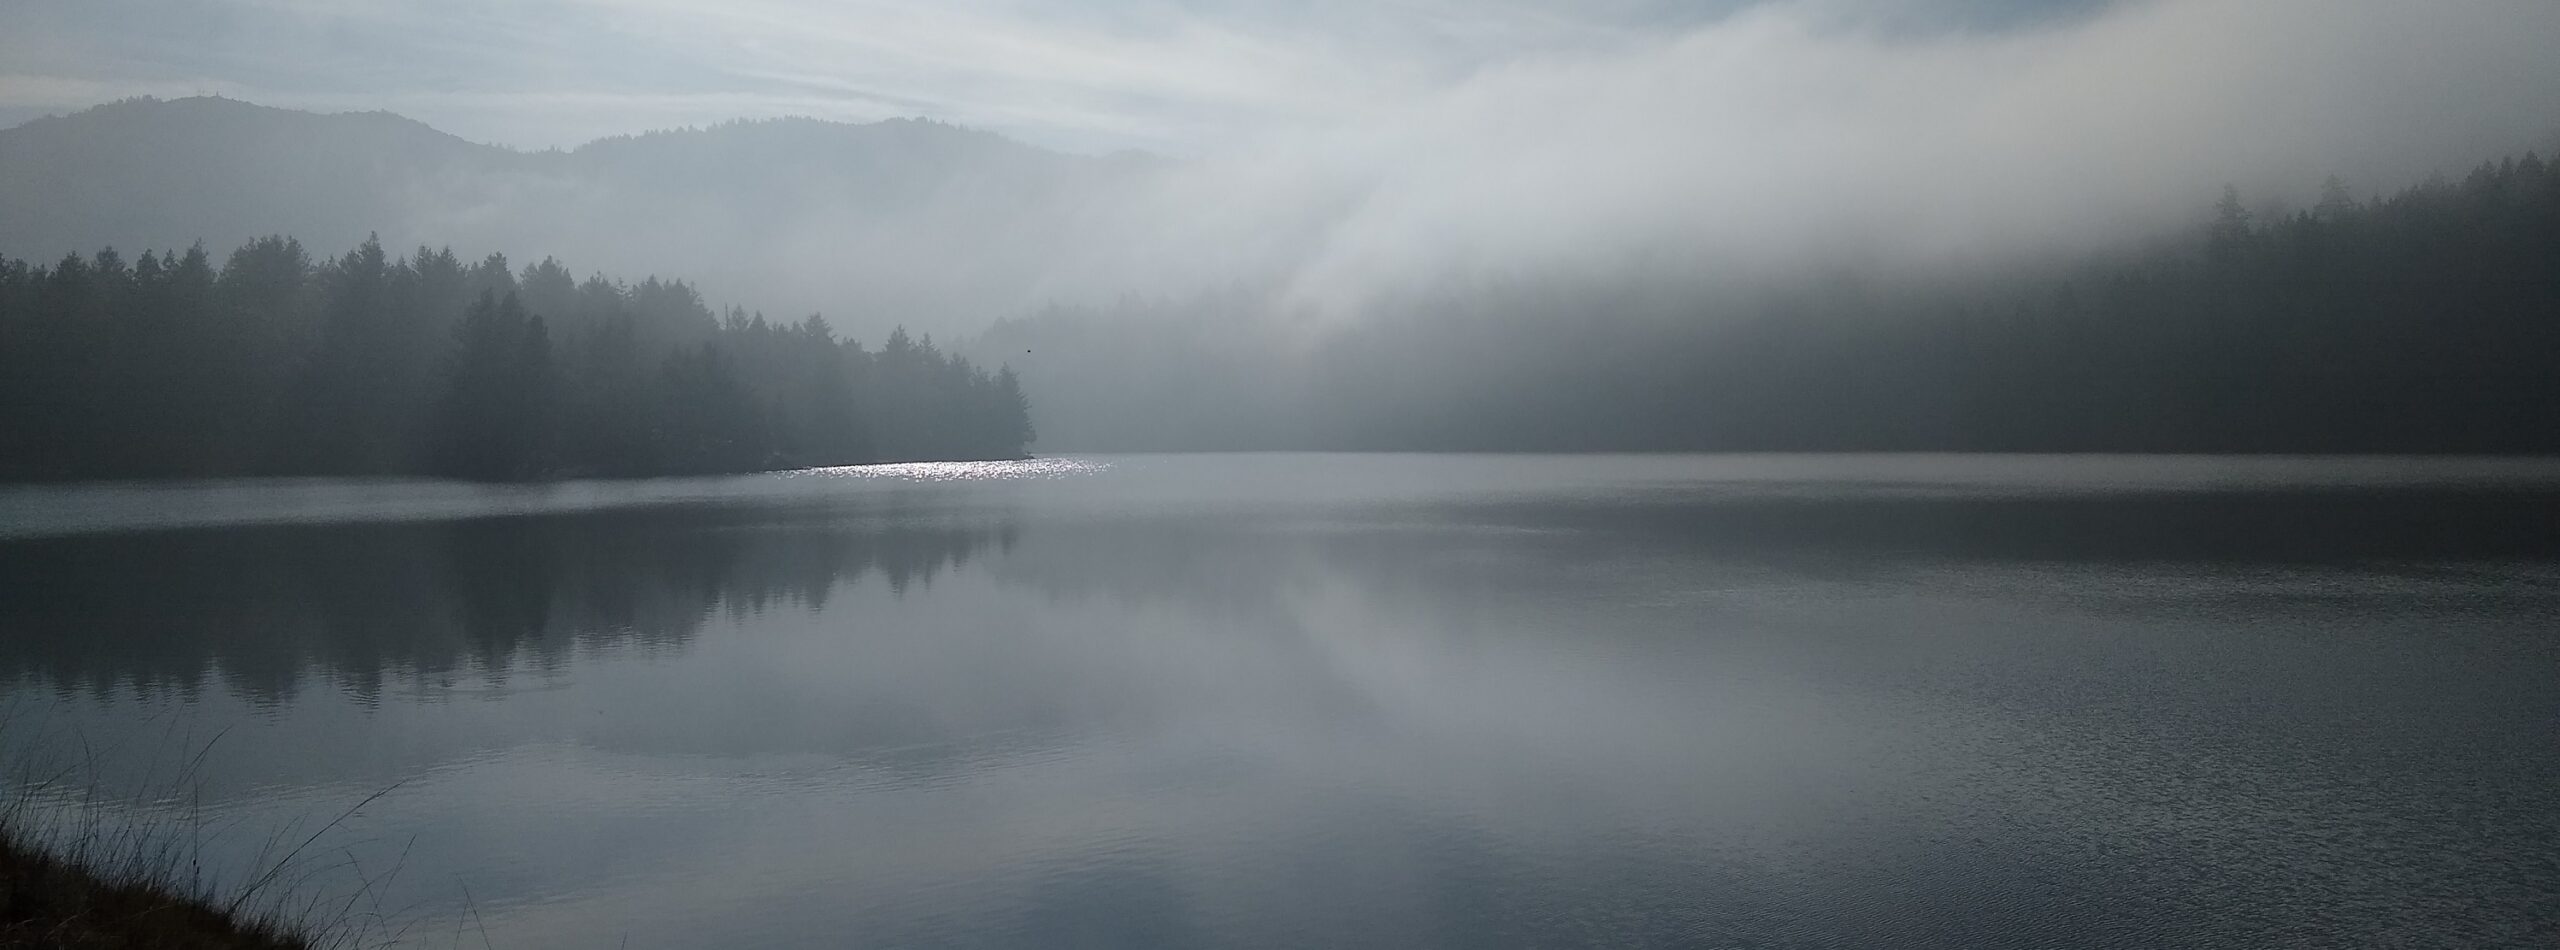 A lake on a misty day, with sparkles on the water near the far shore, which is forested and recedes into misty mountains